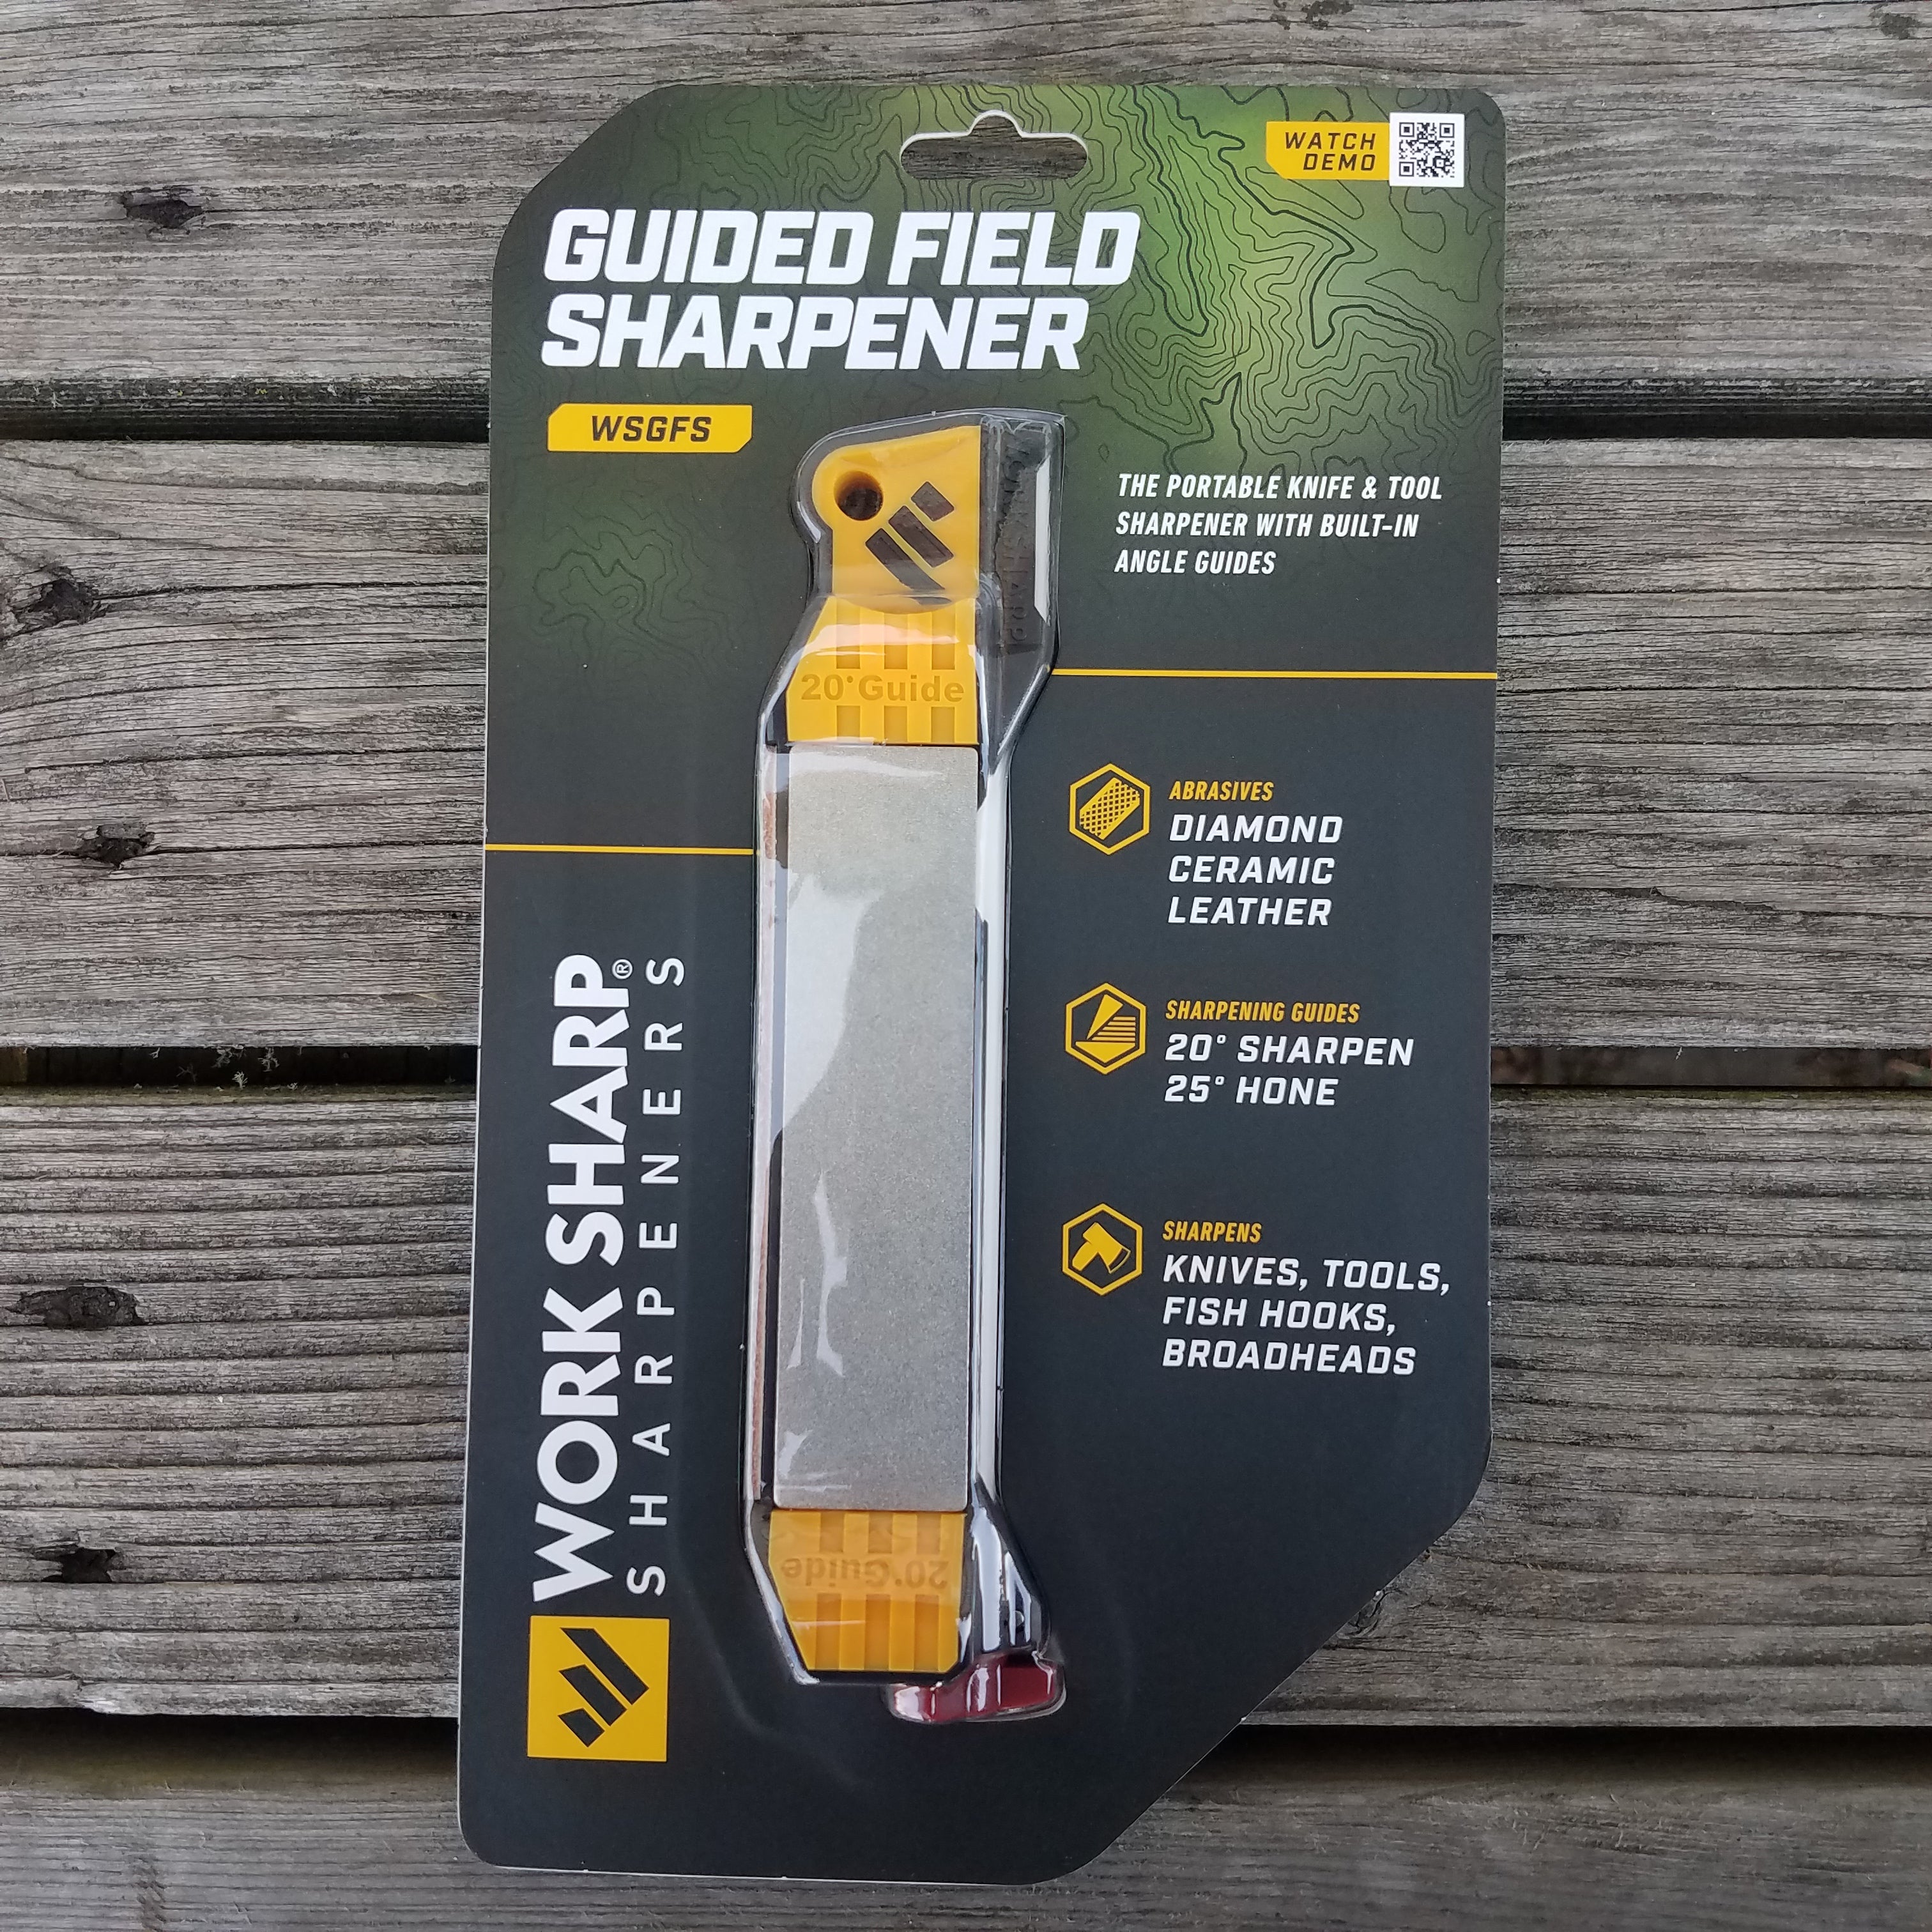 Work Sharp Guided Field Sharpener - Whats in the box? 